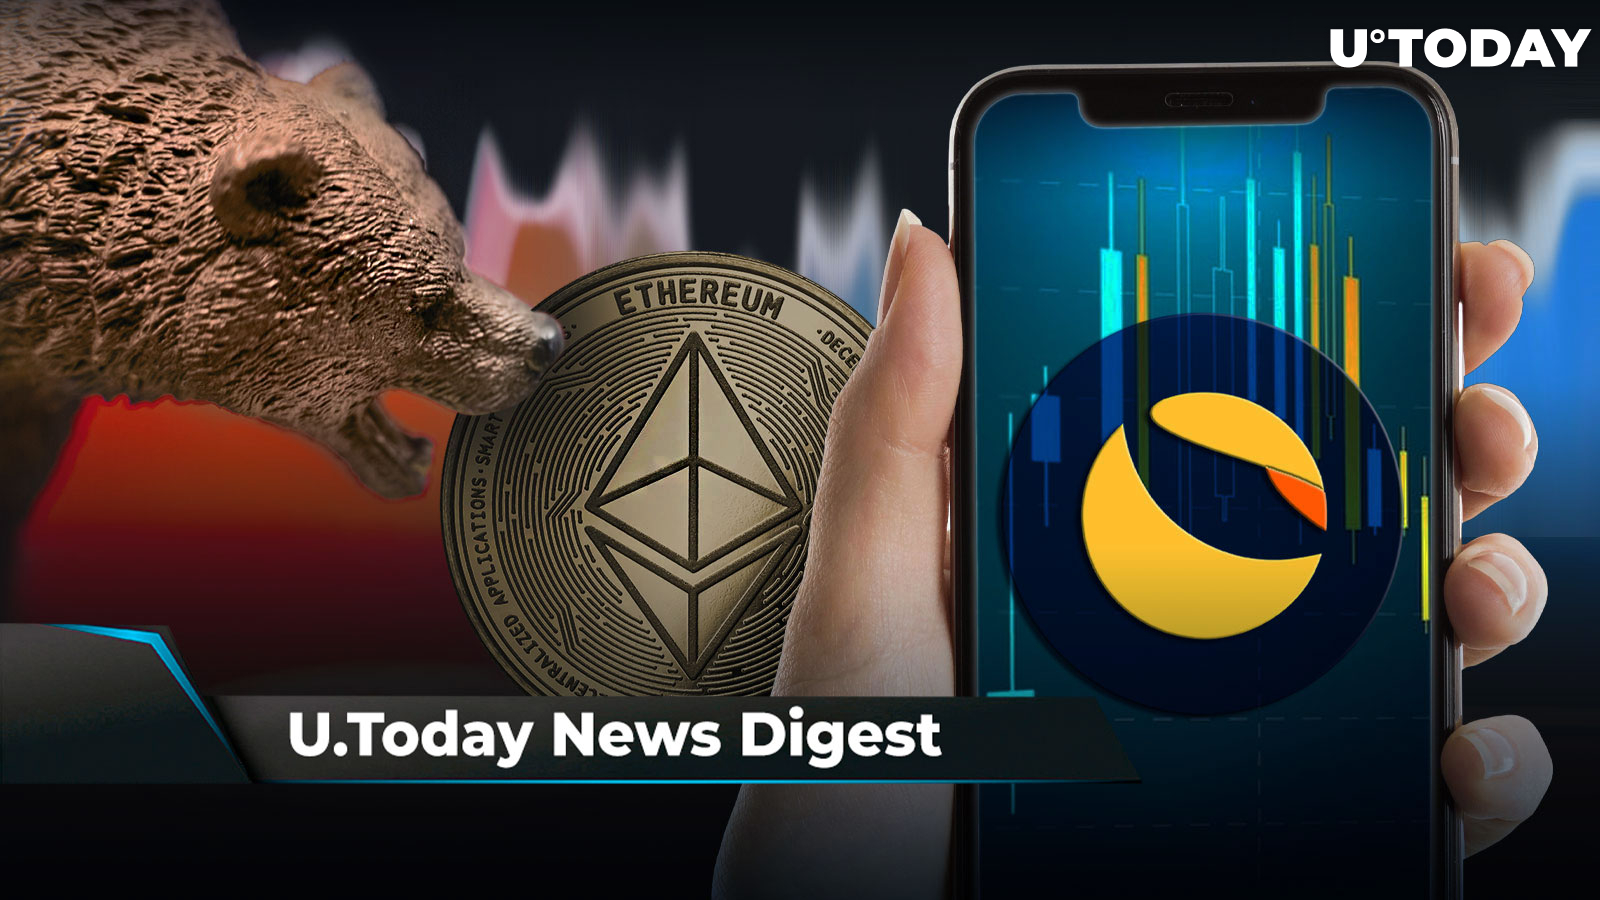 LUNC Becomes Major Gainer Among Top 100 Cryptos, SHIB Nears Price Breakout, ETH Bears Lose $300 Million in One Hour: Crypto News Digest by U.Today